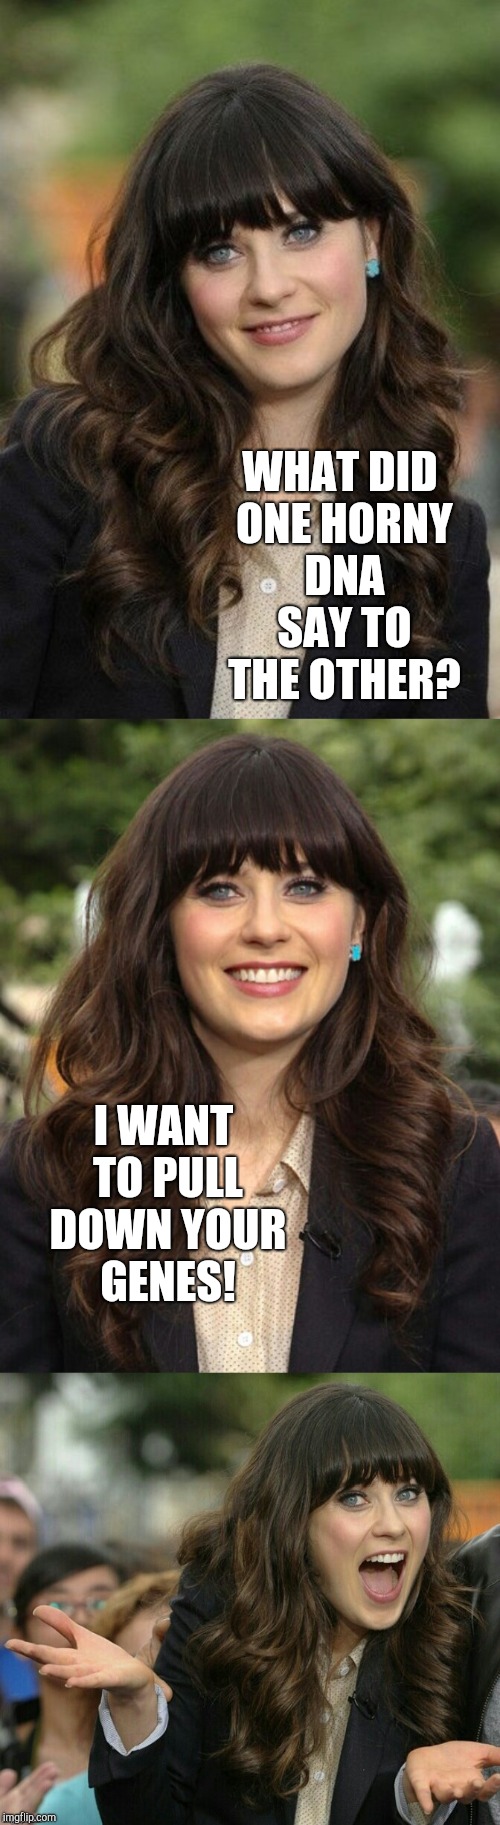 Zooey Deschanel joke template | WHAT DID ONE HORNY DNA SAY TO THE OTHER? I WANT TO PULL DOWN YOUR GENES! | image tagged in zooey deschanel joke template,jbmemegeek,zooey deschanel,bad pun | made w/ Imgflip meme maker